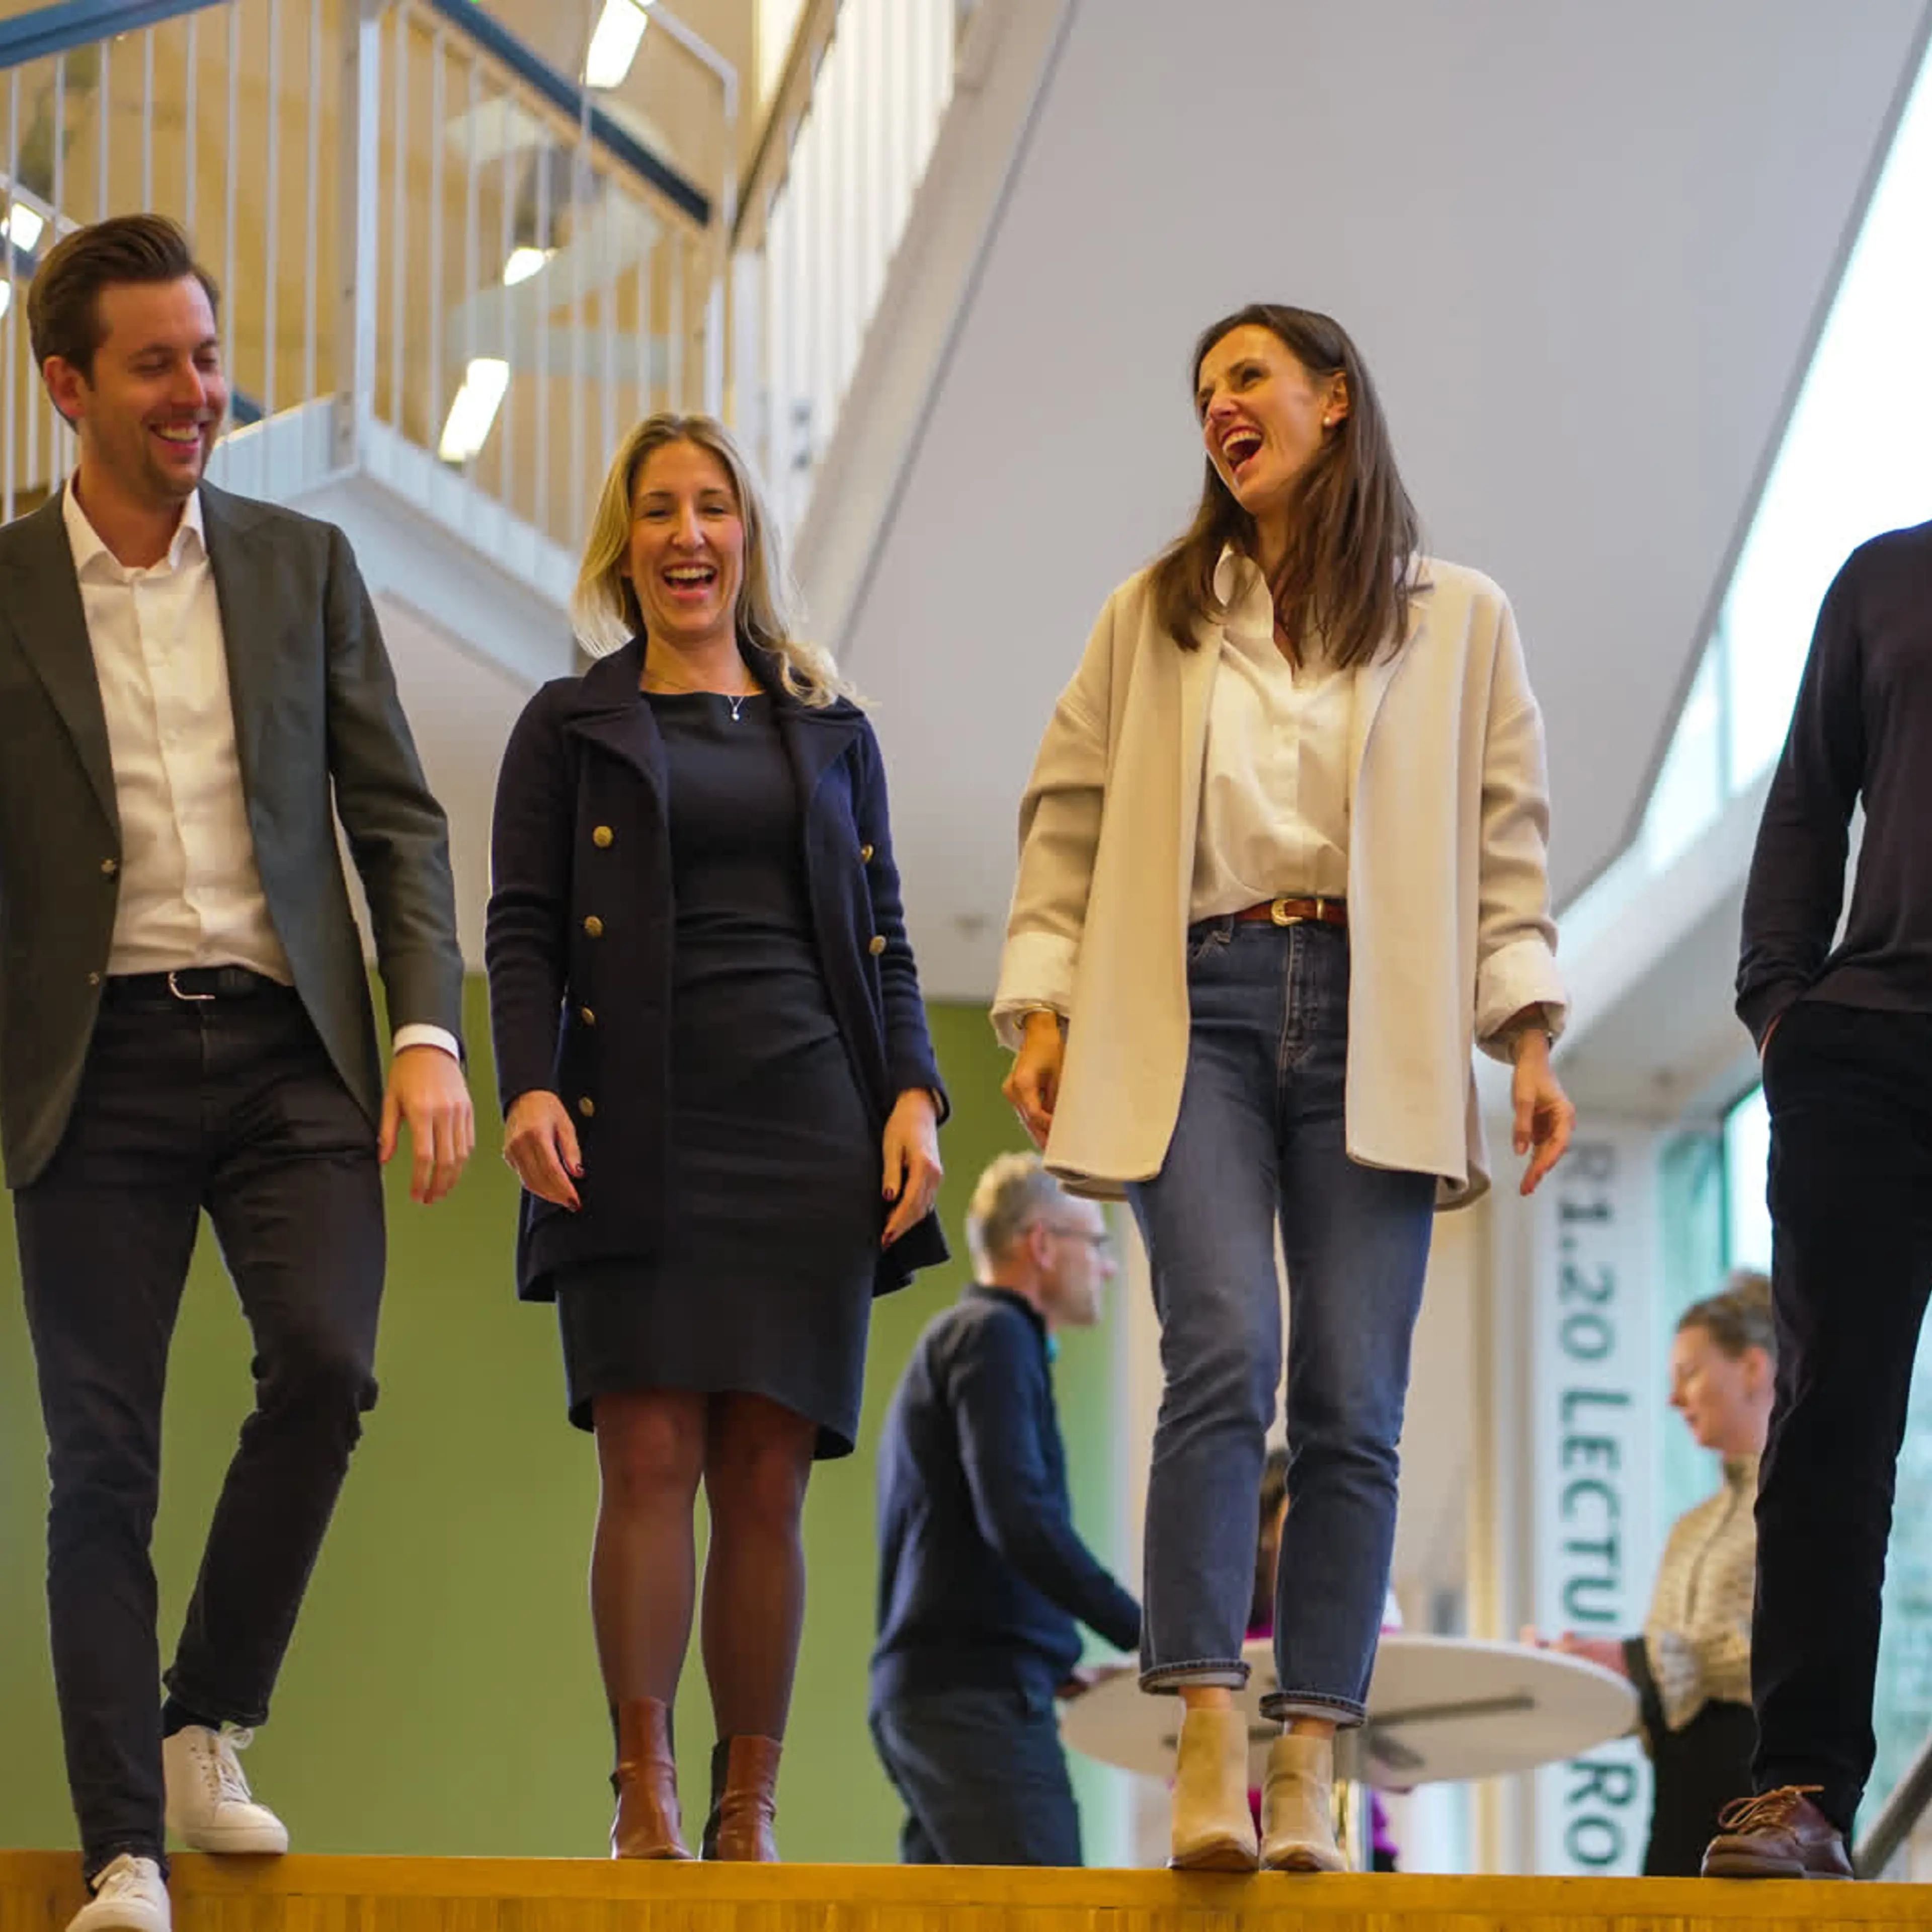 Four CBS Executive MBA participants laughing in the staircase